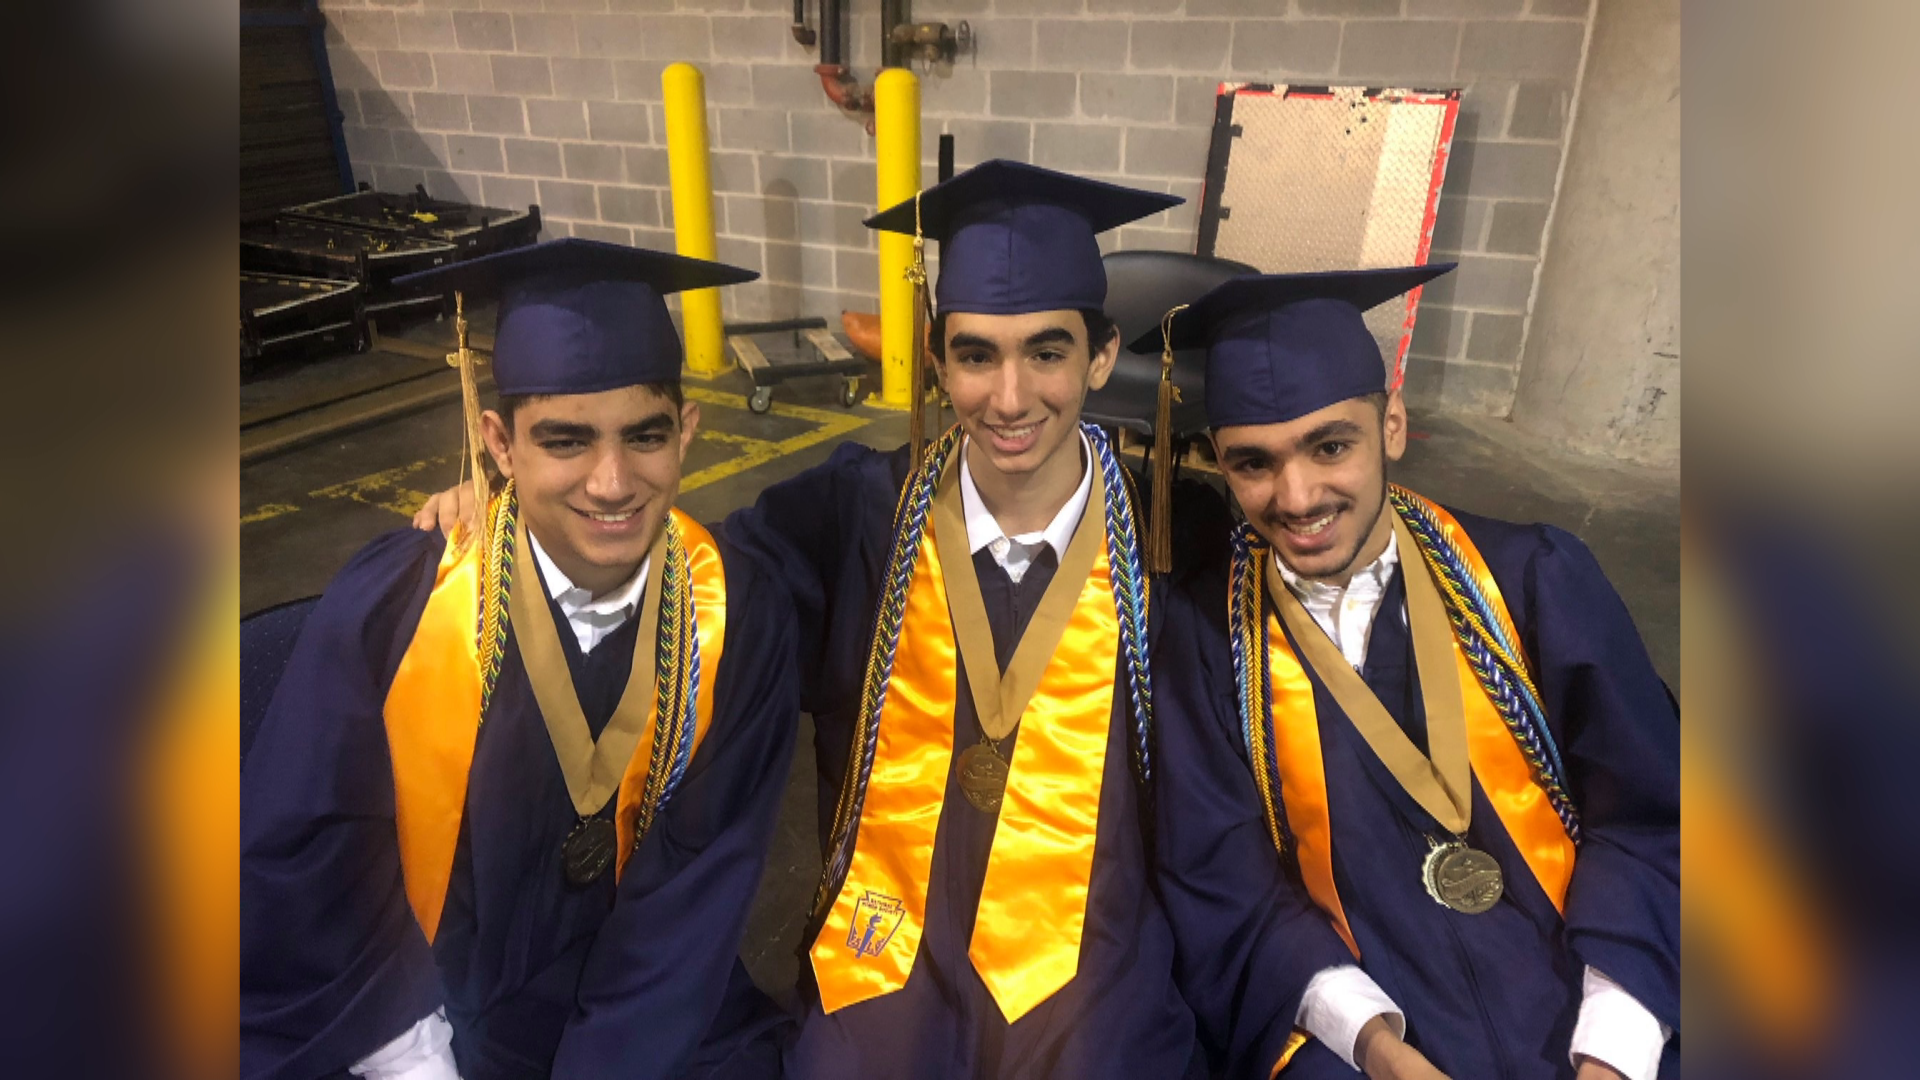 The Kashlan triplets are named co-valedictorians just days before graduating from West Forsyth High School.